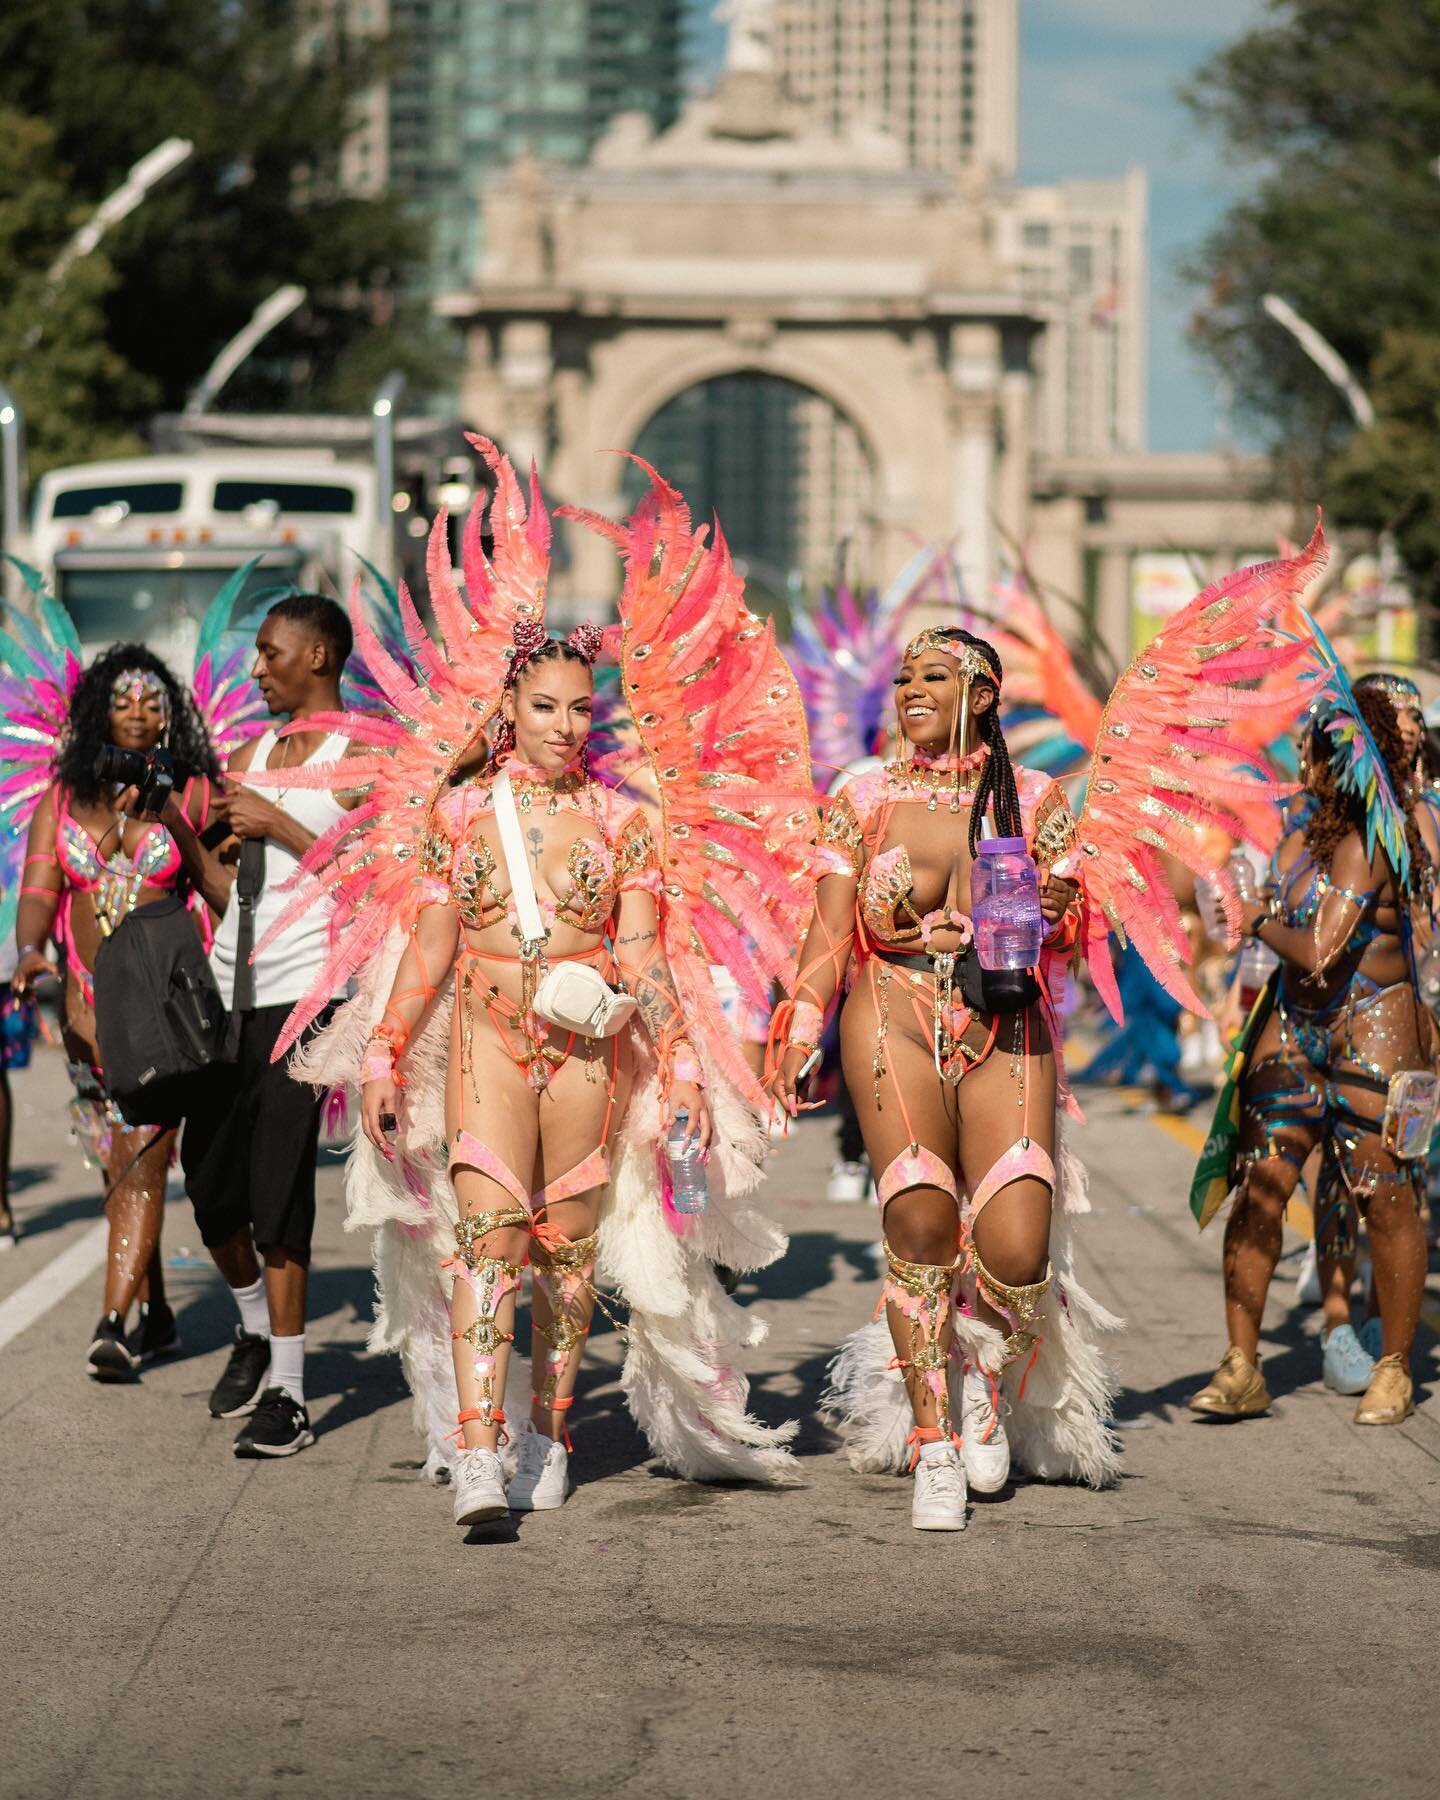 Last weekend was crazy! I was able to go for a quick walk through the @caribana.toronto carnival. What a vibe! Here&rsquo;s some clicks 📸
.
.
.
.
.
#caribana2023 #caribanatoronto #torontofestivals #photography #jamaica #carribean #weareallone #cultu